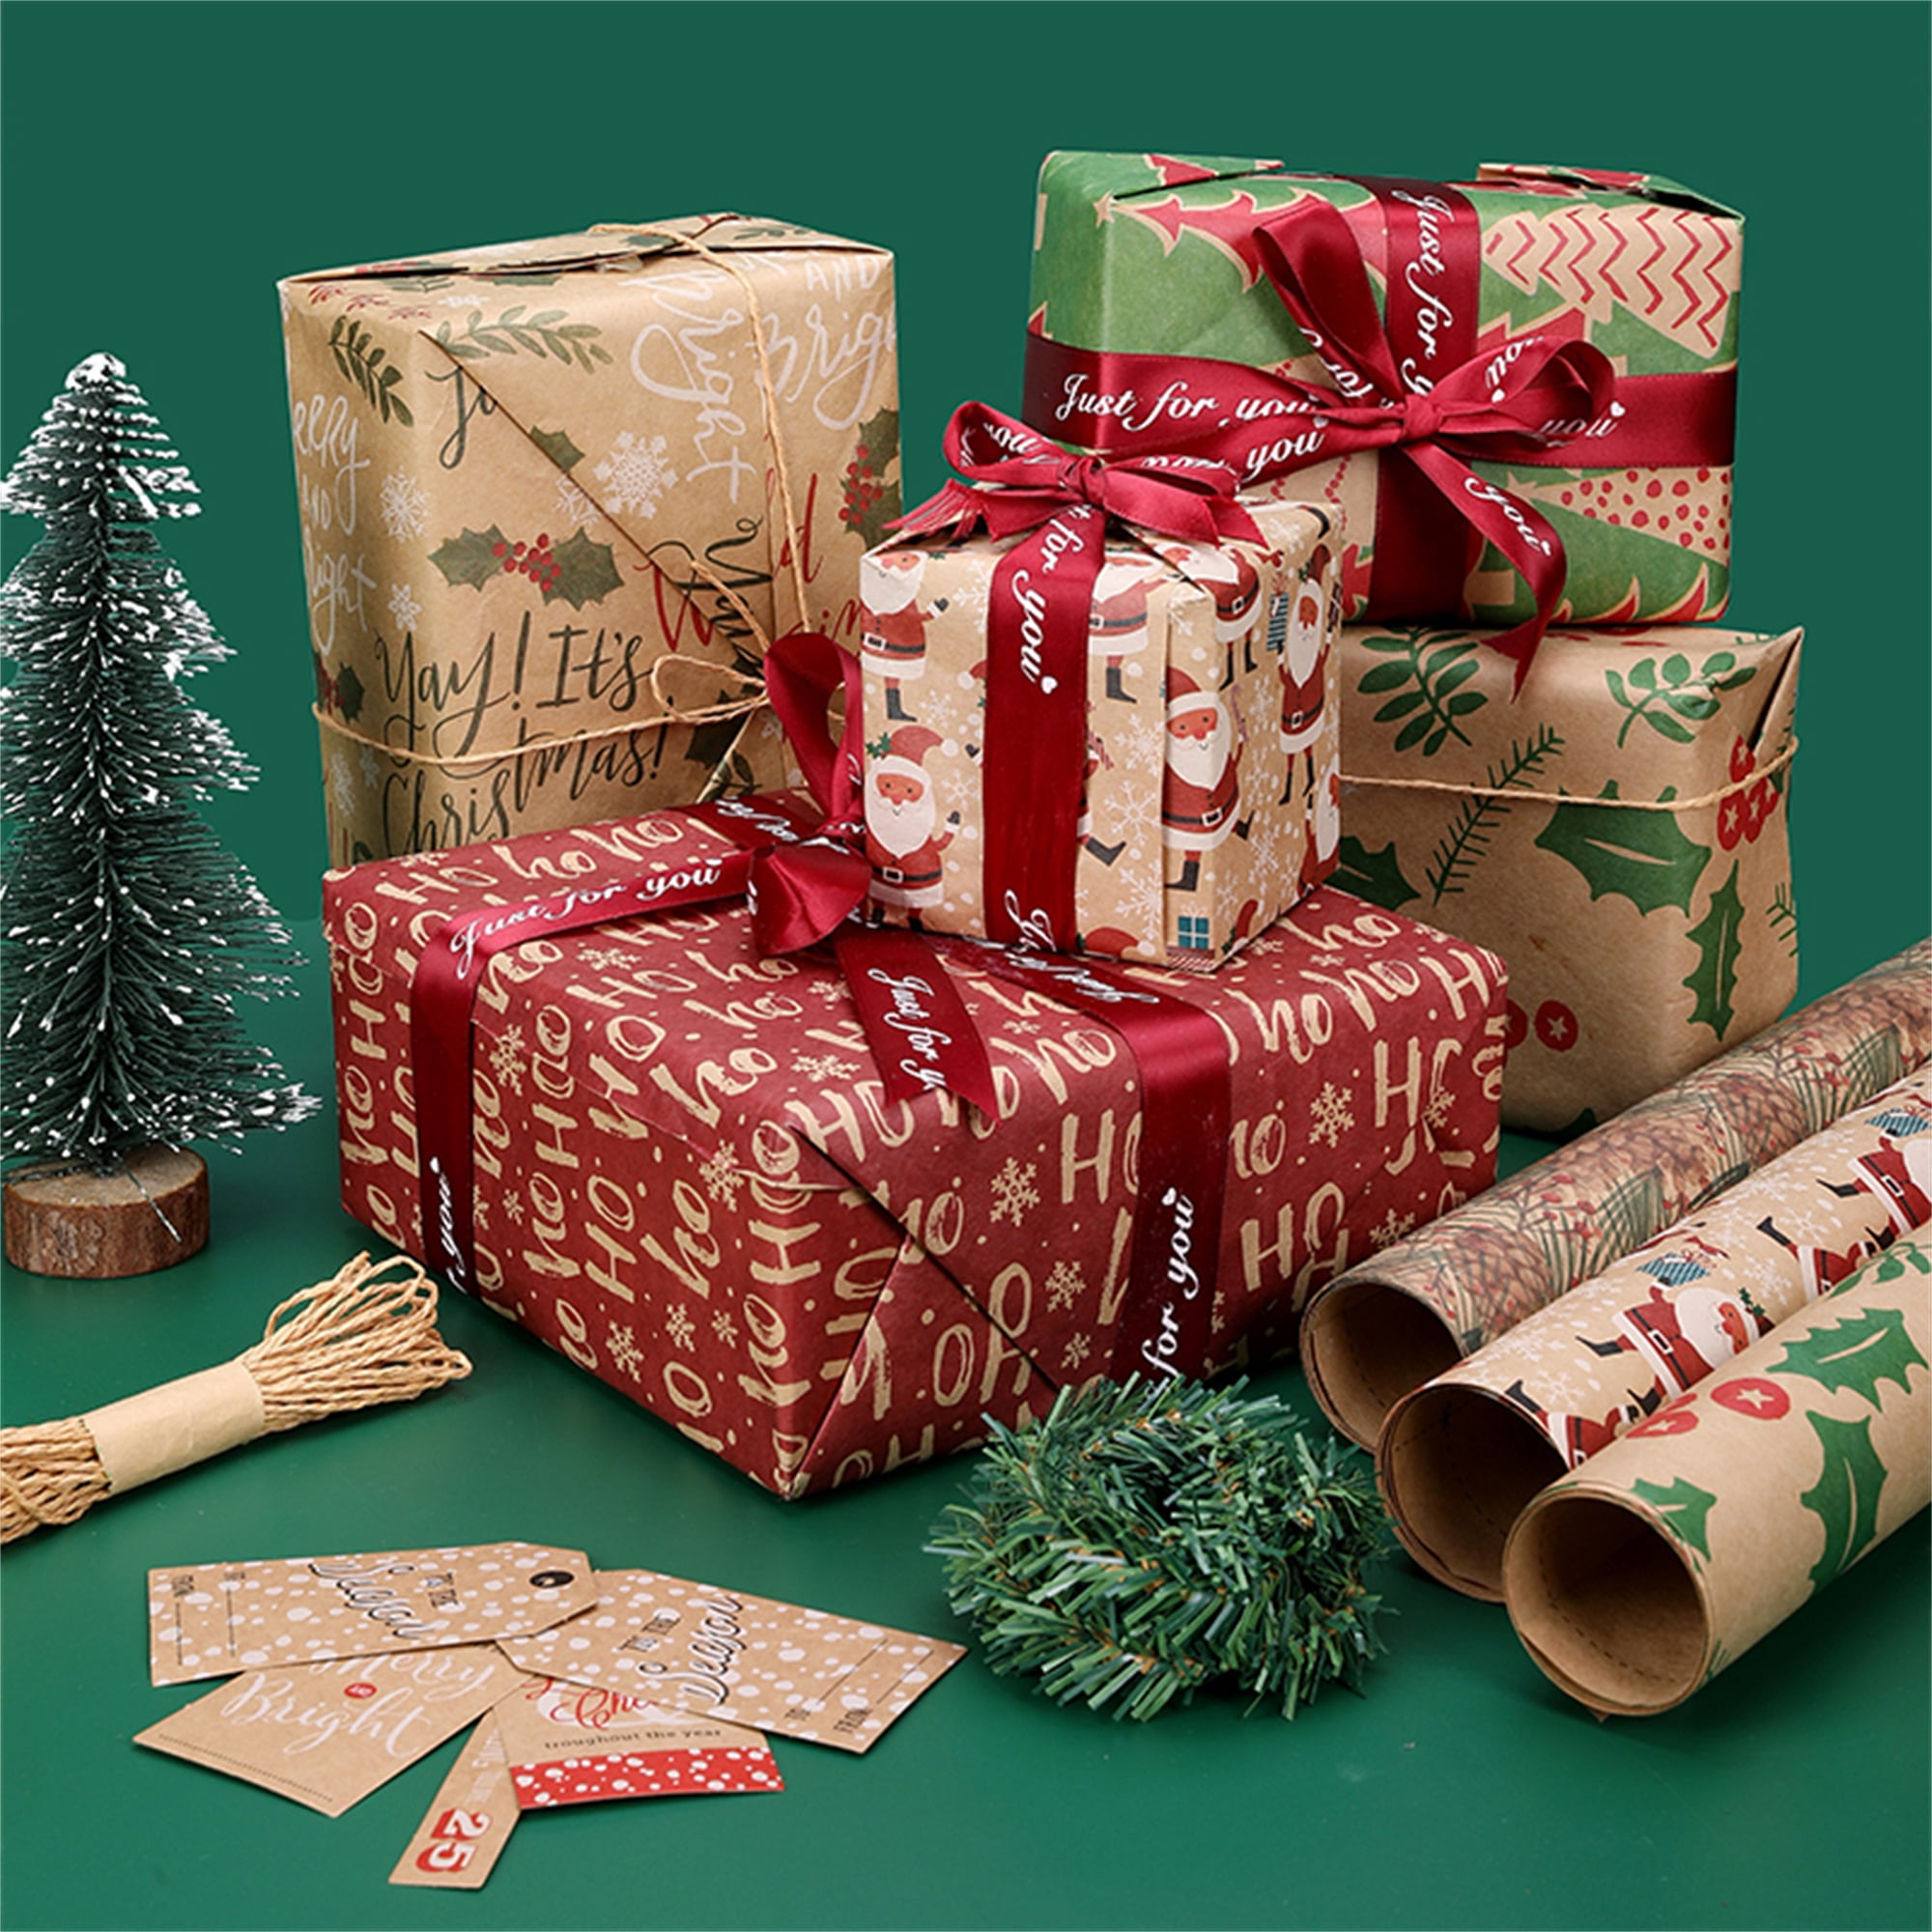 15M Total 3 Rolls 5 Metres x 70cm Christmas Gift Wrapping Paper 